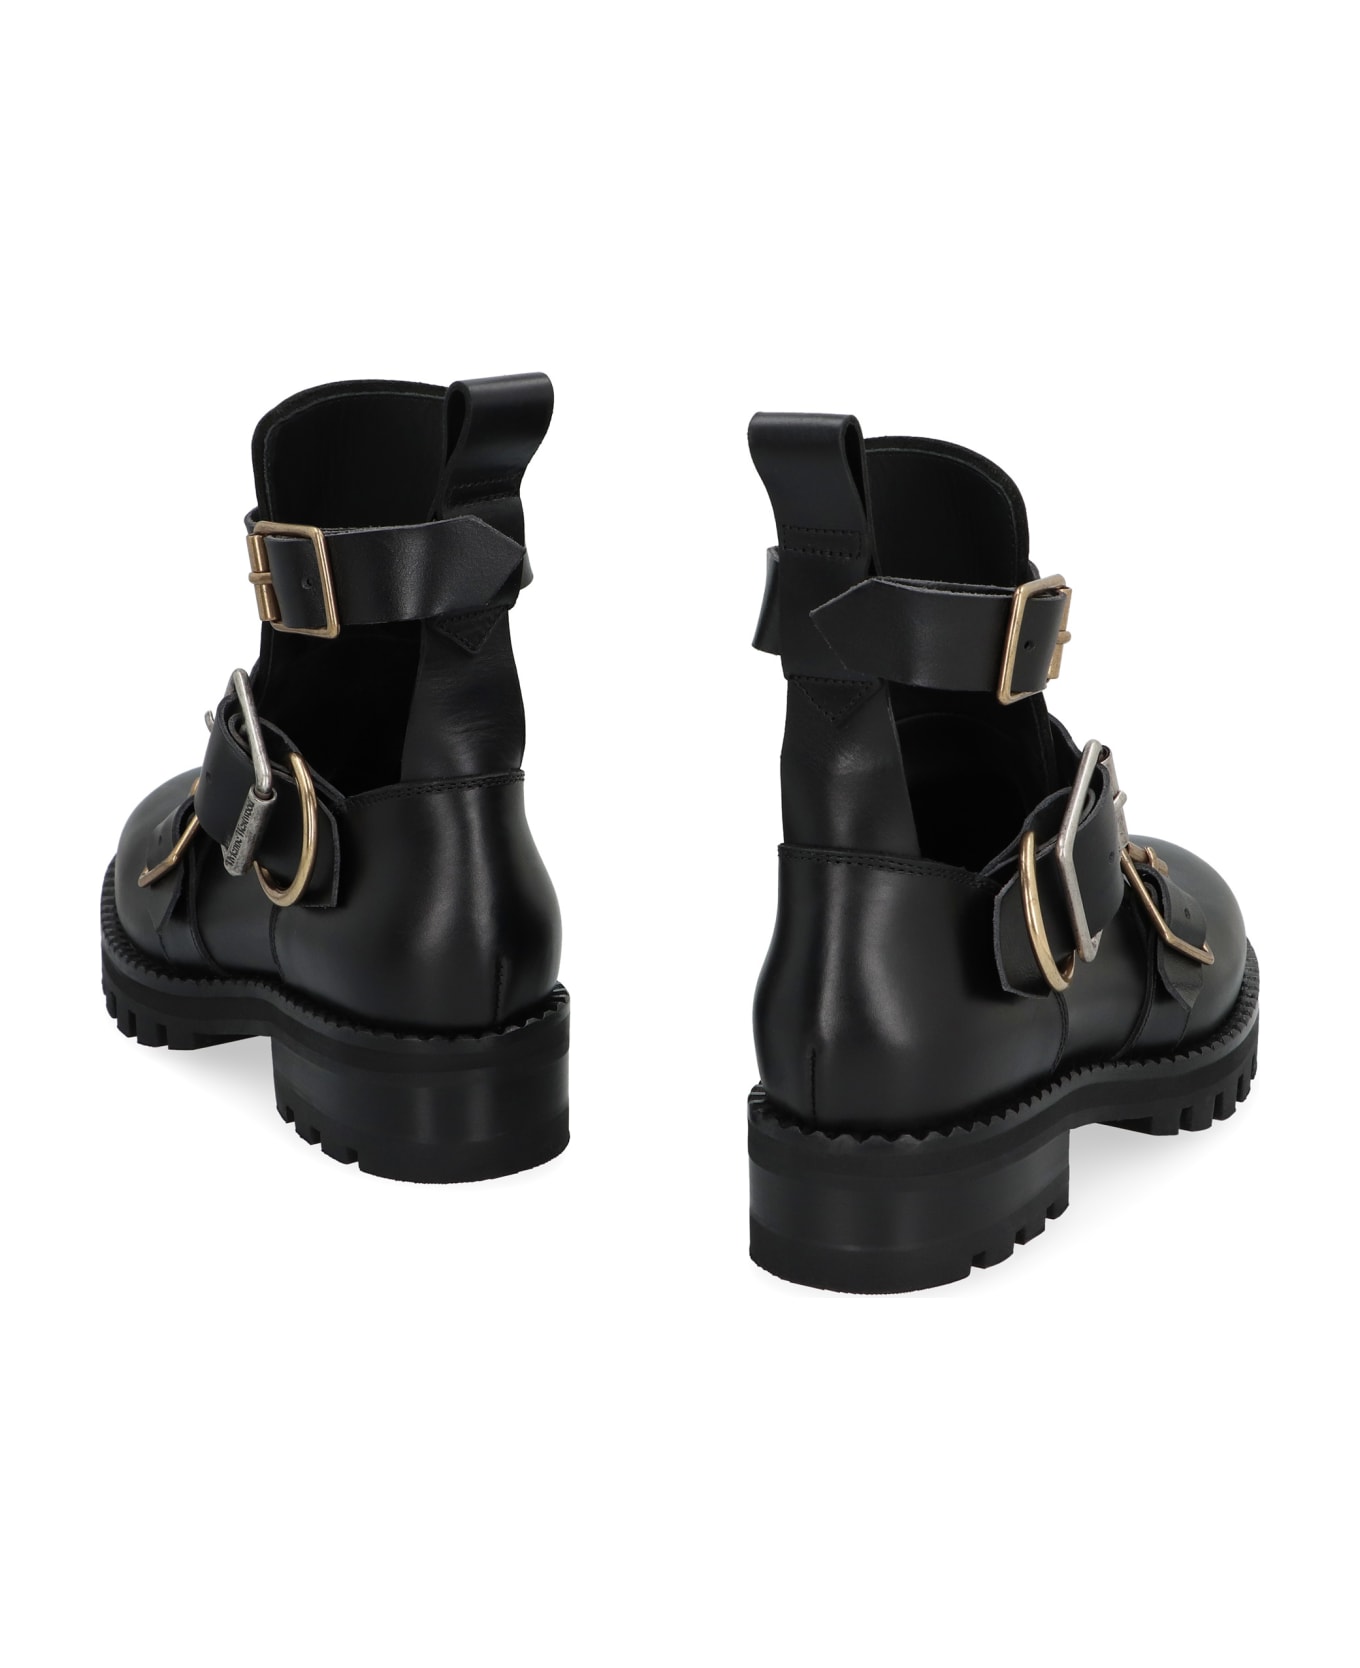 Vivienne Westwood Rome Leather Ankle Boots - black ブーツ